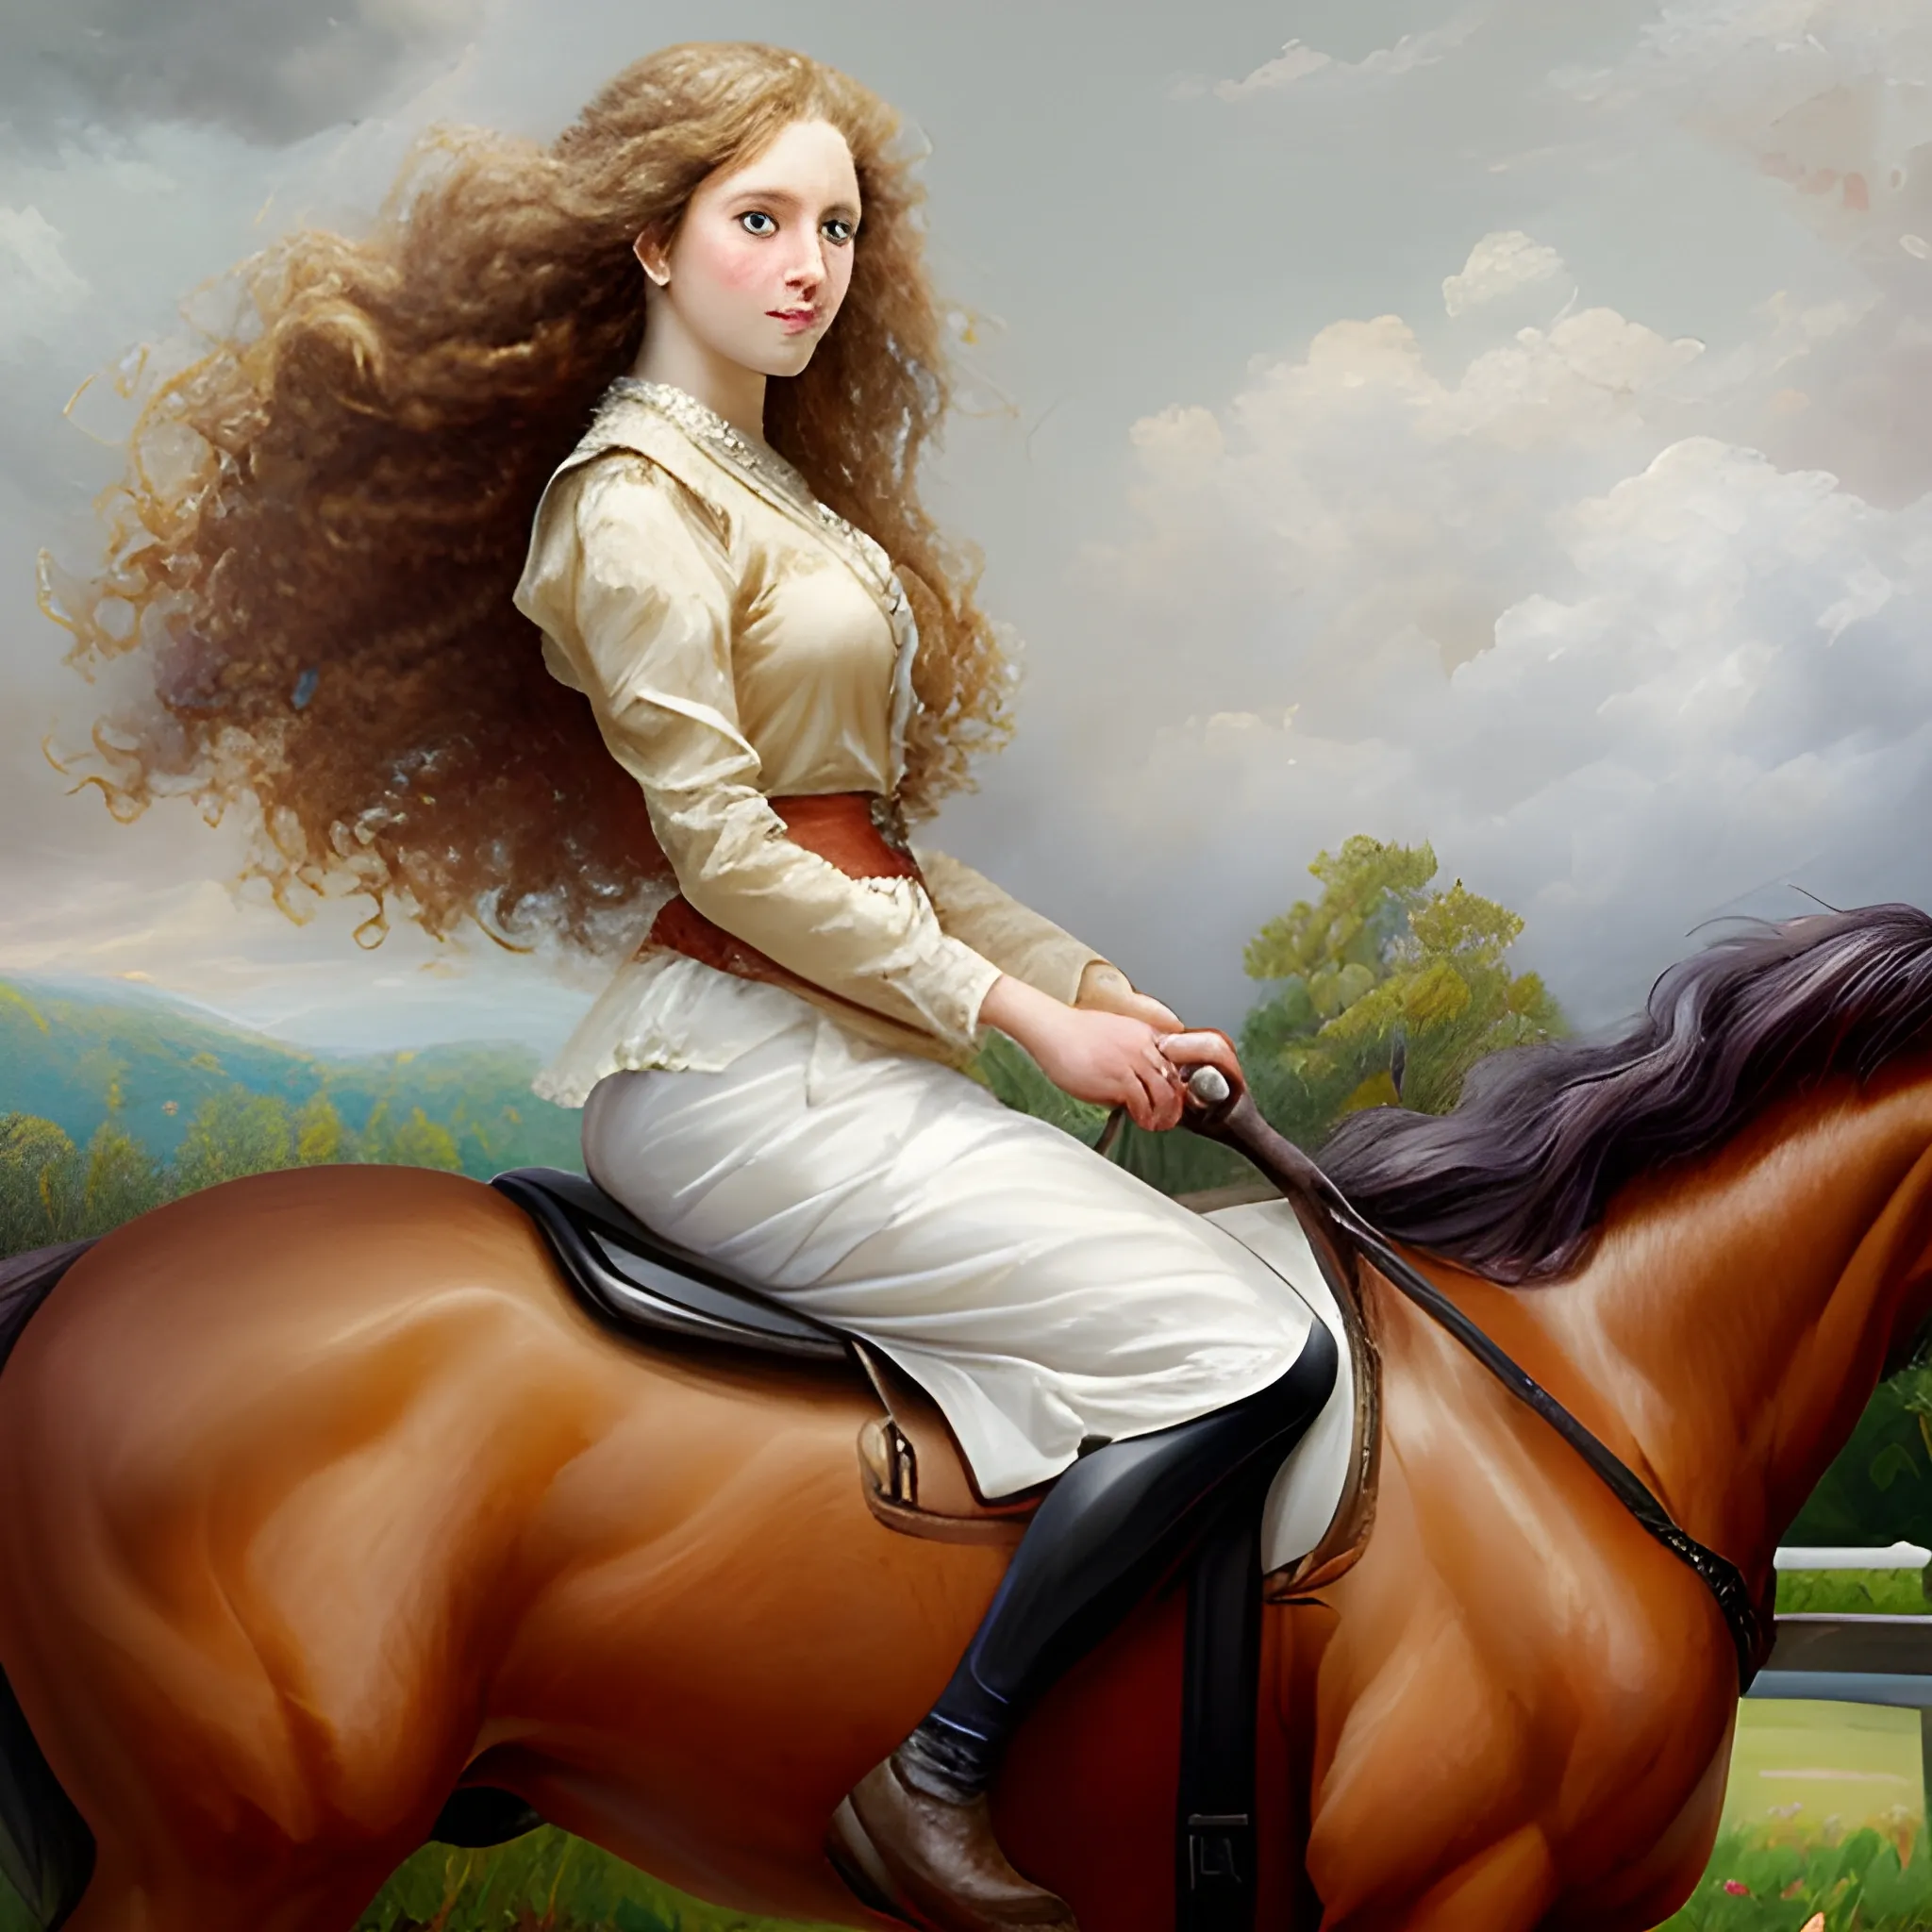 , Oil Painting woman long curly hair riding horse
